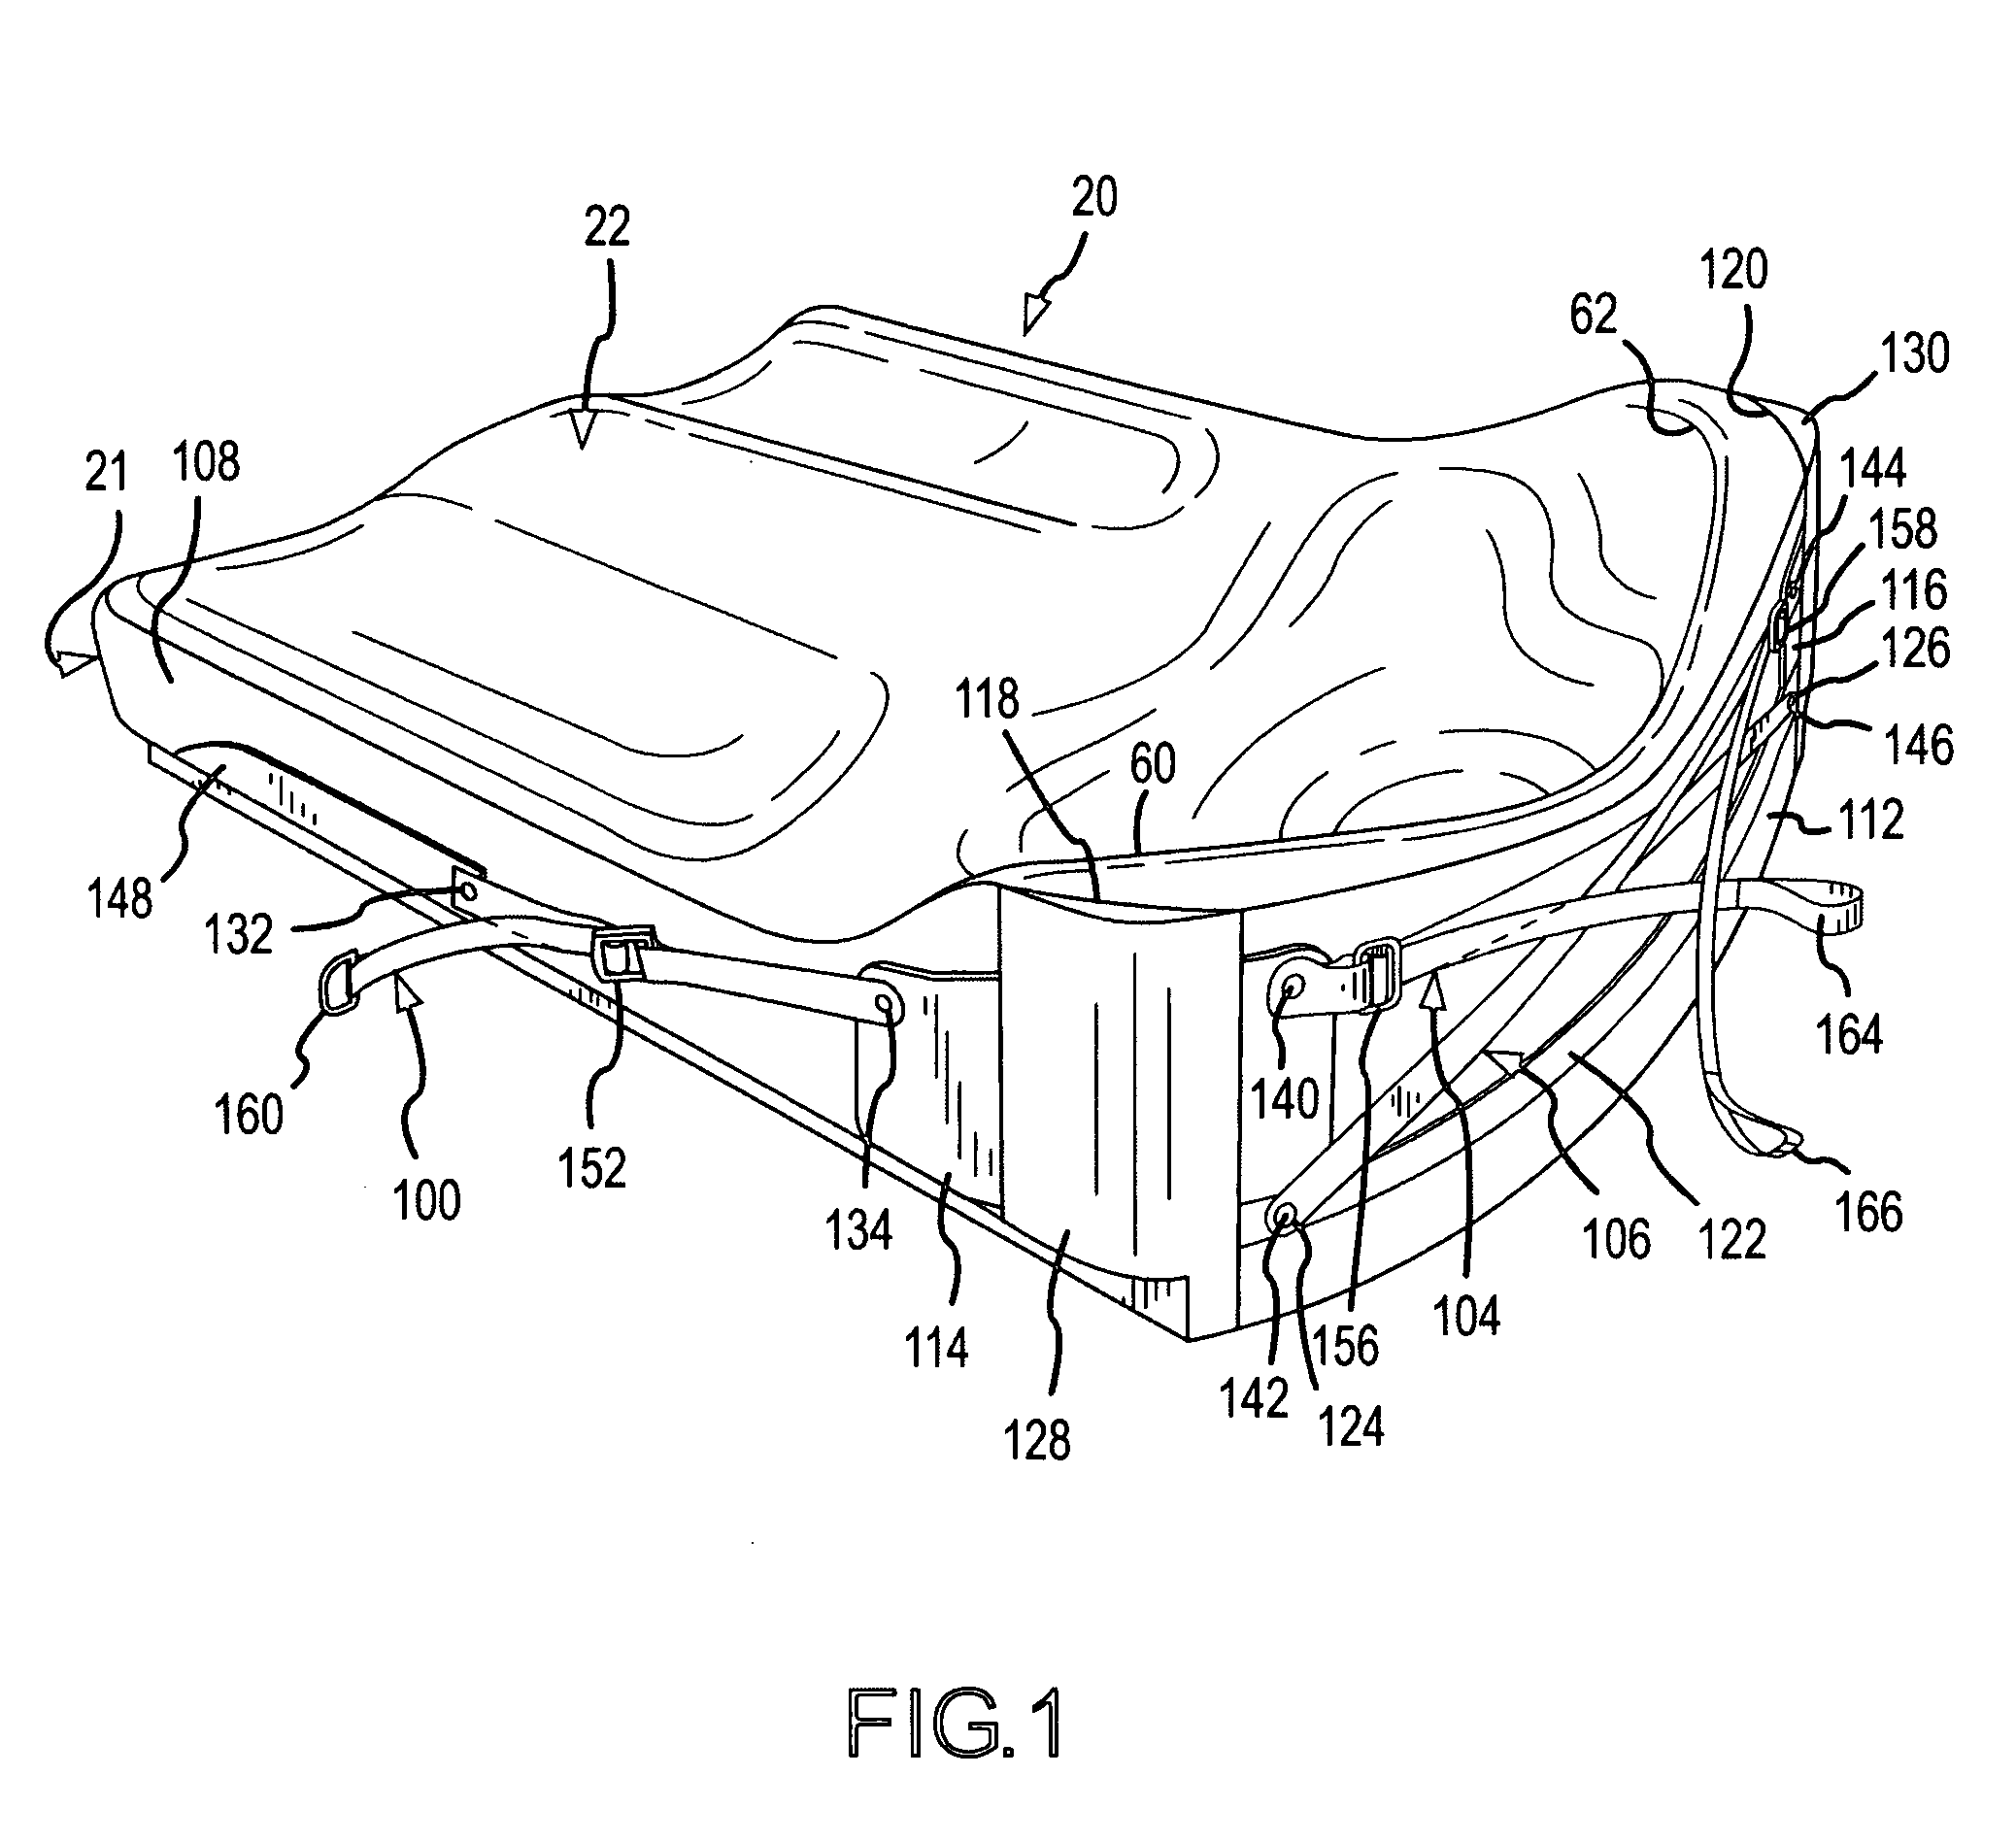 Reinforced and adjustable contoured seat cushion and method of reinforcing and adjusting the contoured seat cushion